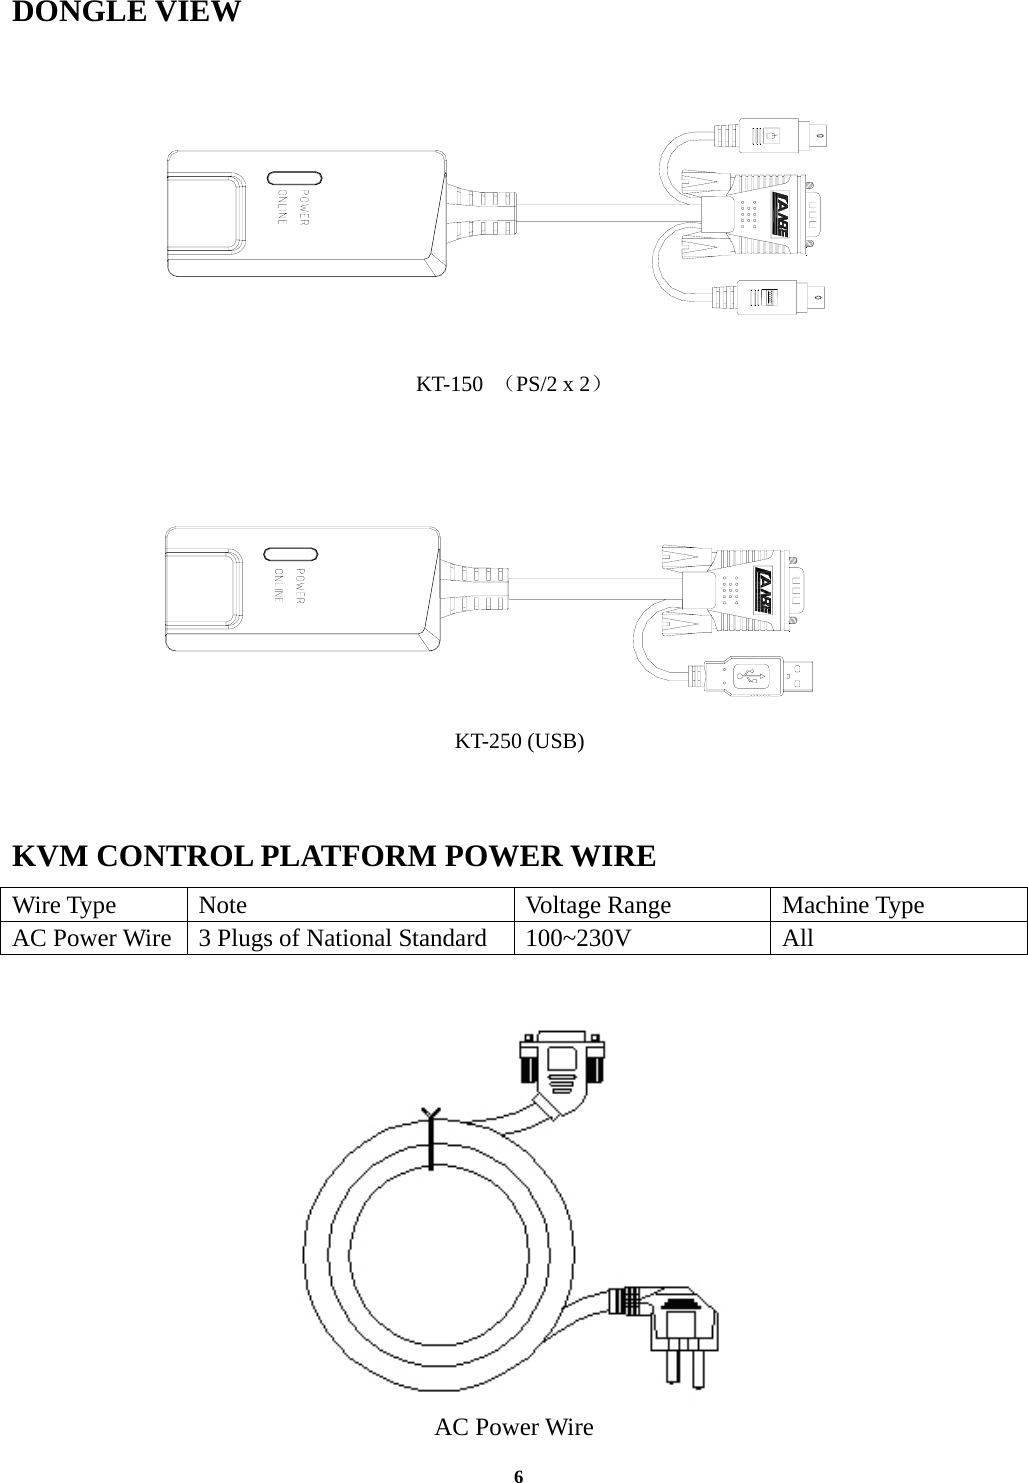   6  DONGLE VIEW             KT-150  （PS/2 x 2）                                              KT-250 (USB)  KVM CONTROL PLATFORM POWER WIRE Wire Type  Note  Voltage Range  Machine Type AC Power Wire  3 Plugs of National Standard  100~230V  All    AC Power Wire 